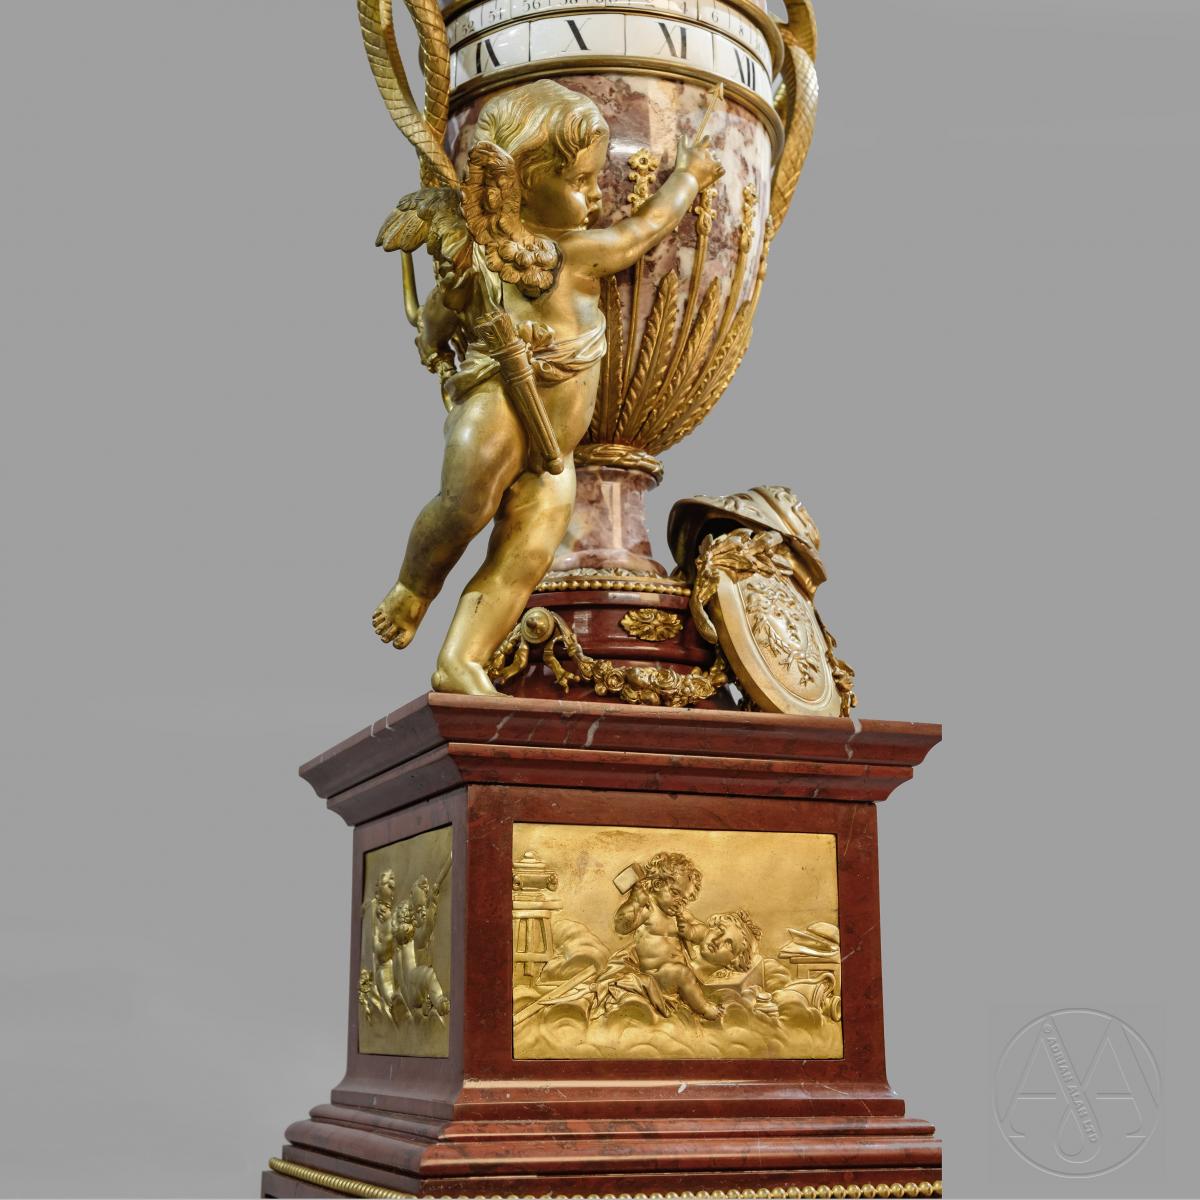 A Rare Louis XVI Style Gilt-Bronze Mounted Marble Annular Dial Pedestal Clock In The Manner of Jean-André and Jean-Baptiste Lepaute